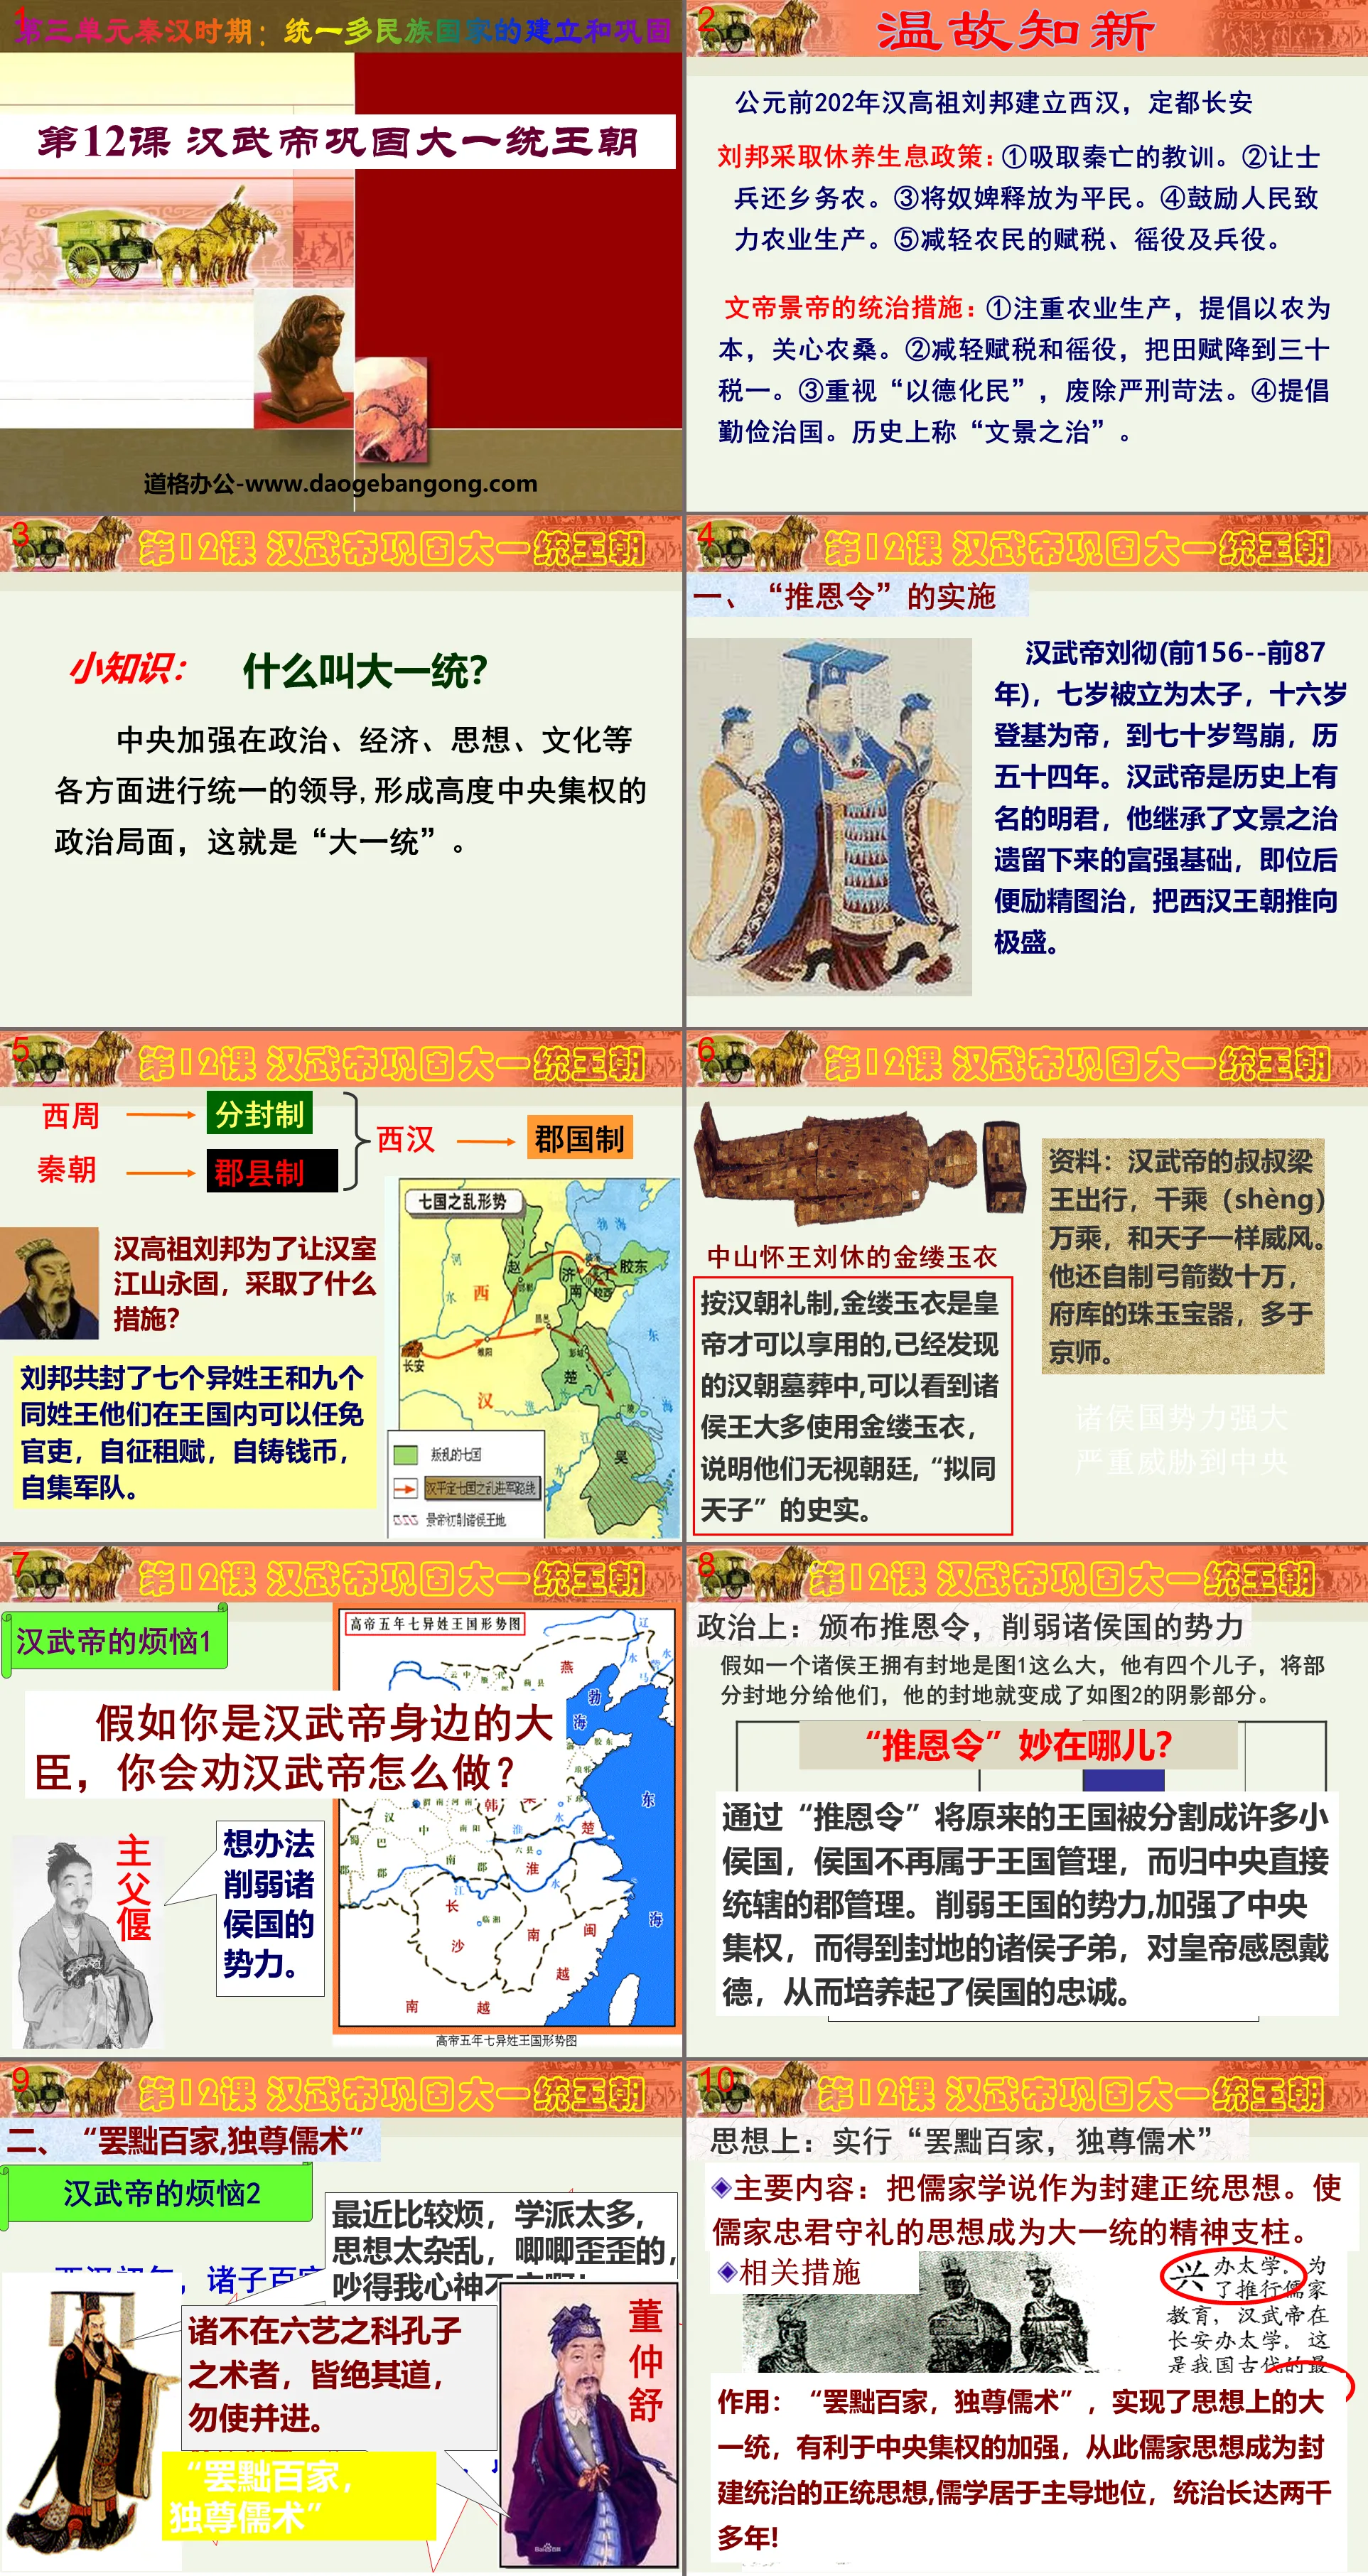 "Emperor Wu of the Han Dynasty consolidated the unified dynasty" PPT courseware